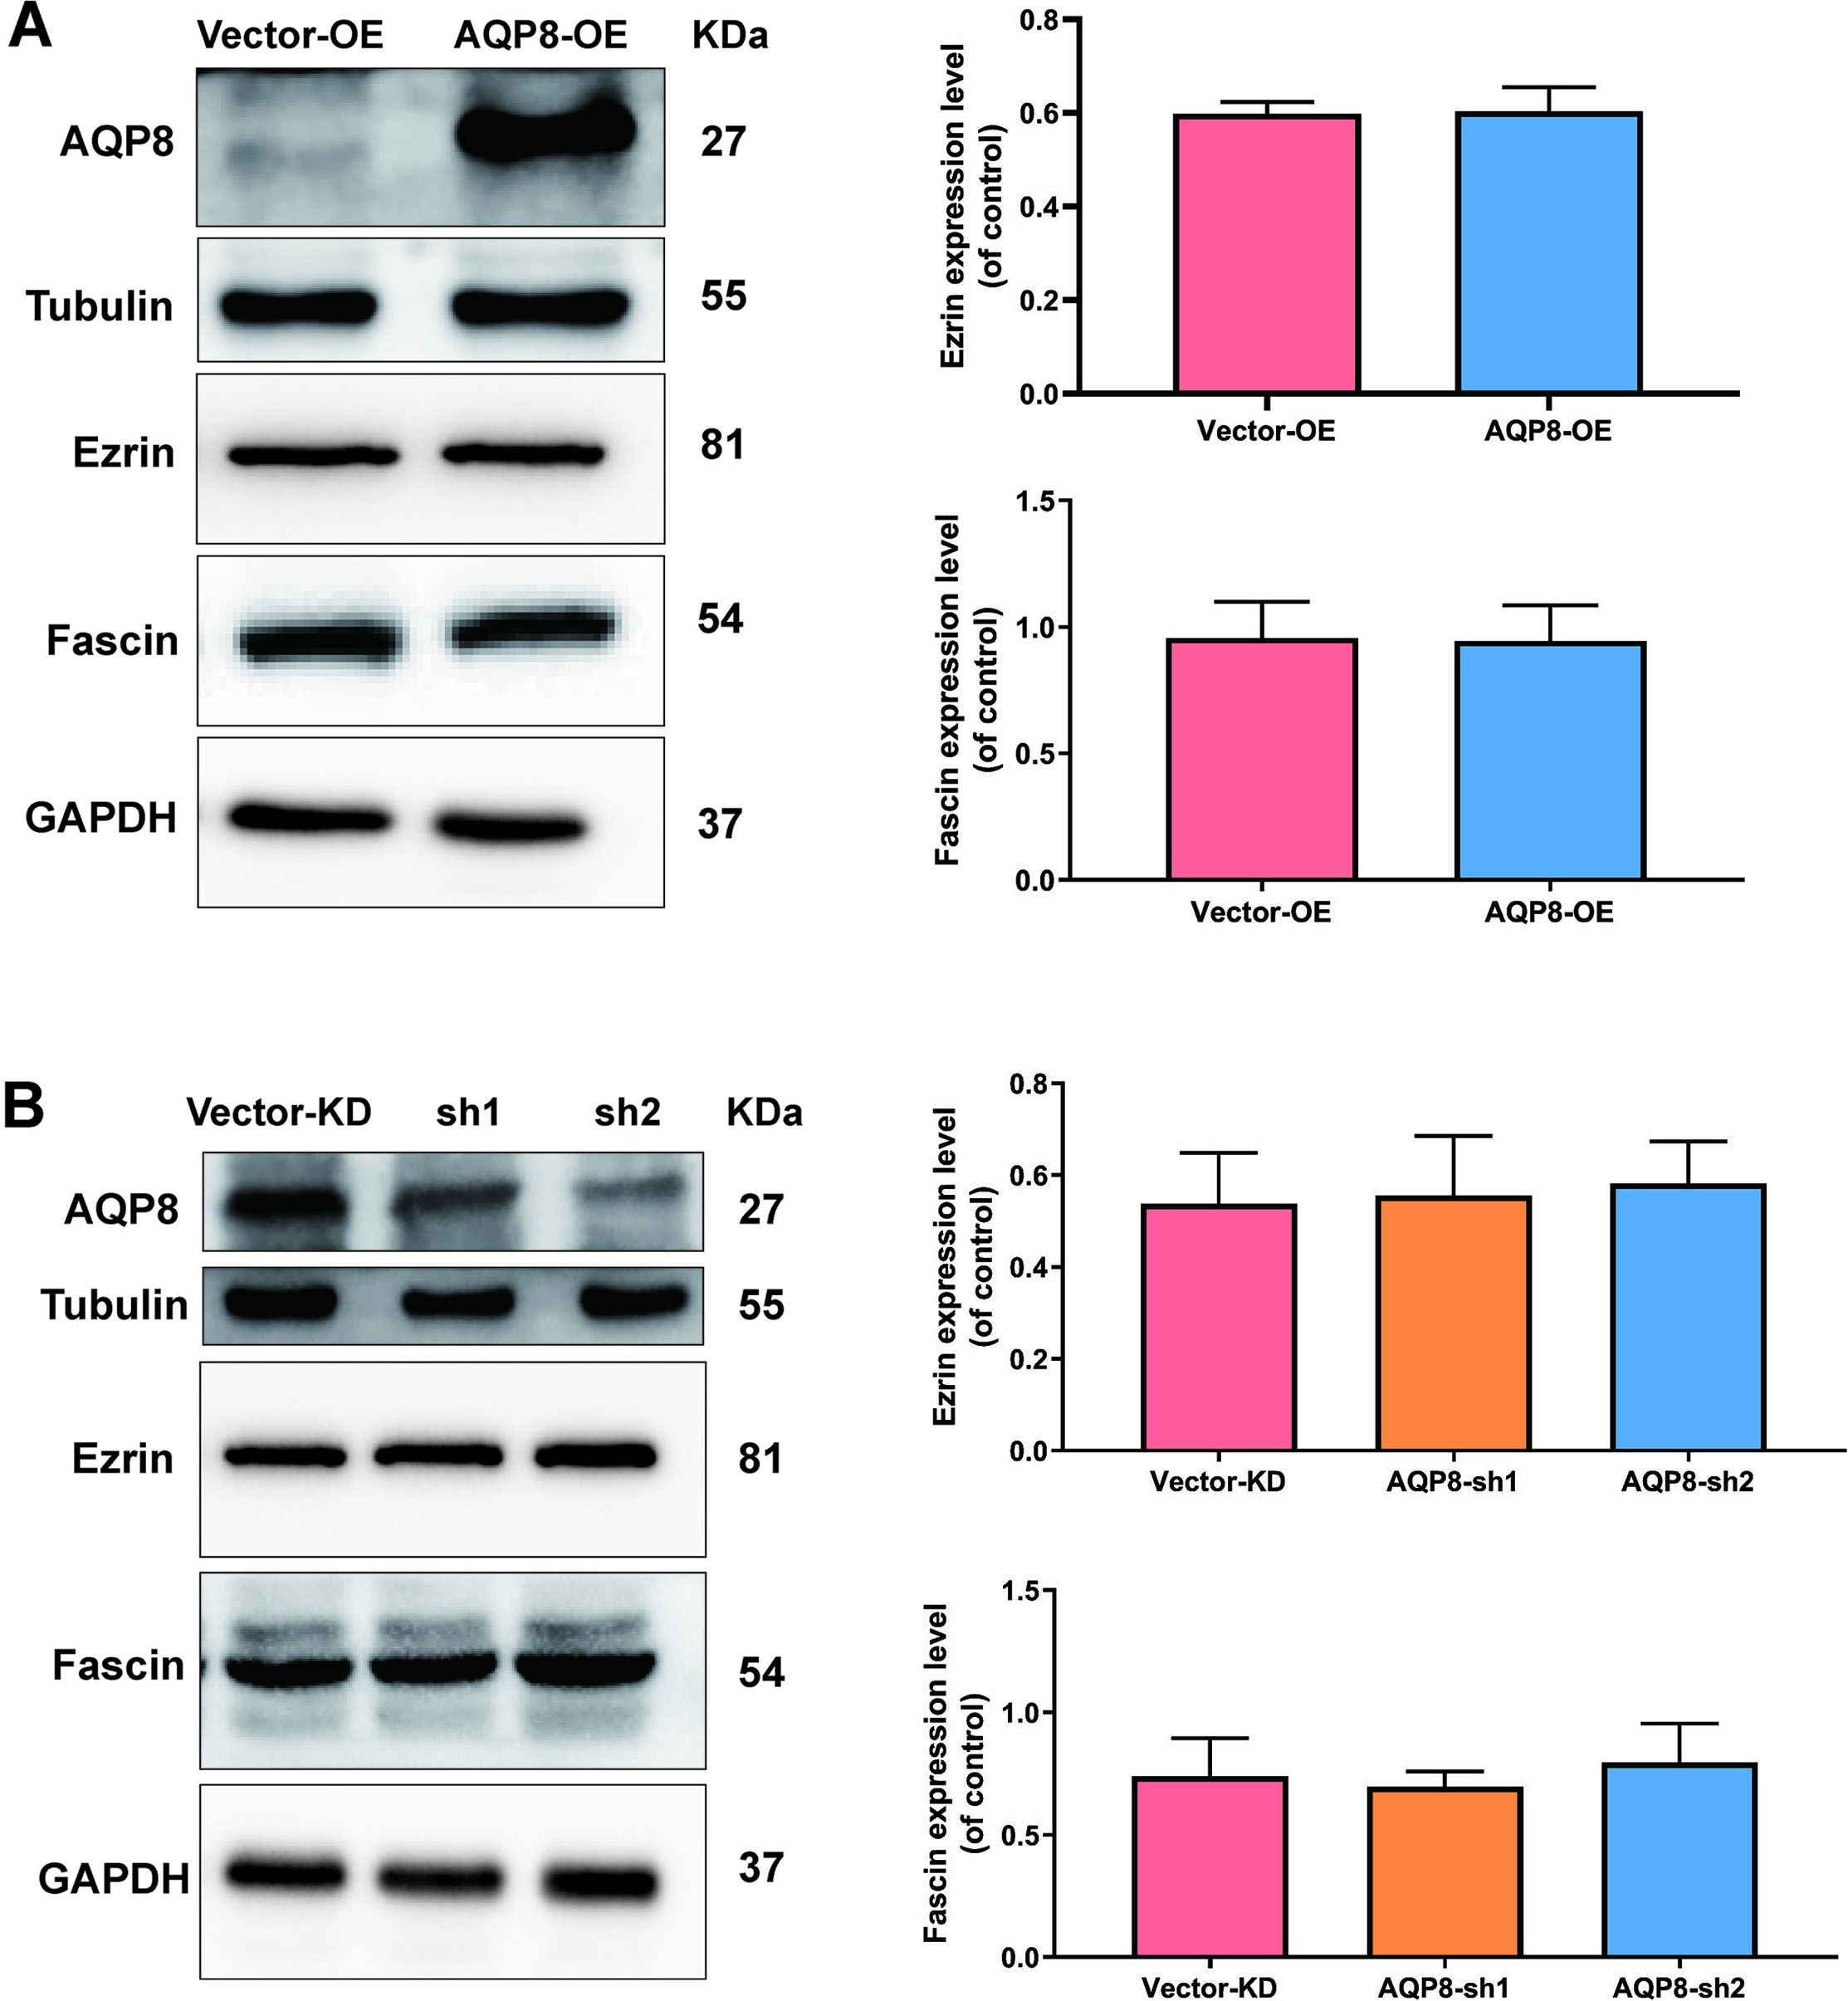 AQP8 does not alter the expression level of Ezrin and Fascin proteins in SiHa cells. A, Expression of Ezrin and Fascin in SiHa cells after AQP8 overexpression were identified by western blot analysis. B, Expression of Ezrin and Fascin in SiHa cells after AQP8 knockdown were identified by western blot analysis. The data shown were the ratios of the Ezrin/GAPDH or Fascin/GAPDH. The data were shown as the means ±standard error of each group. Each experiment was performed three times. P*< 0.05 vs vector group.